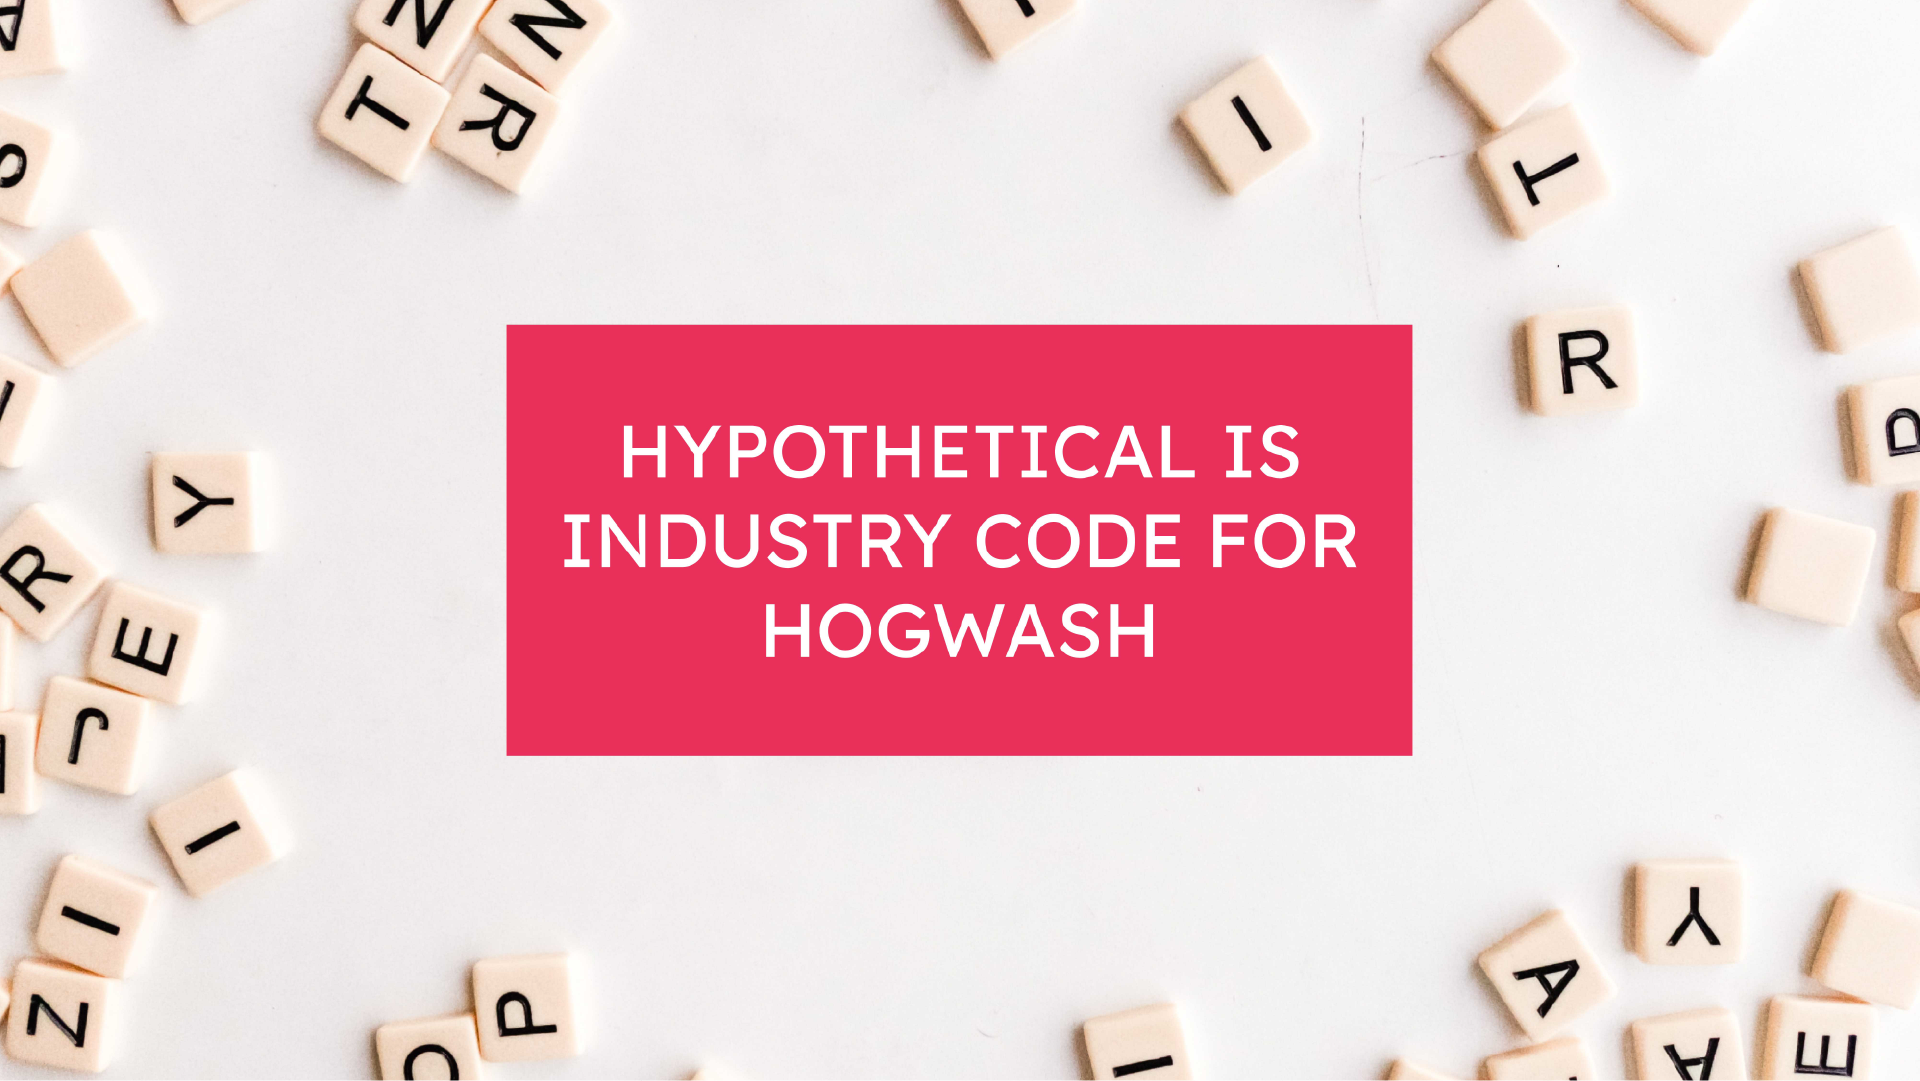 Hypothetical is Industry Code for Hogwash